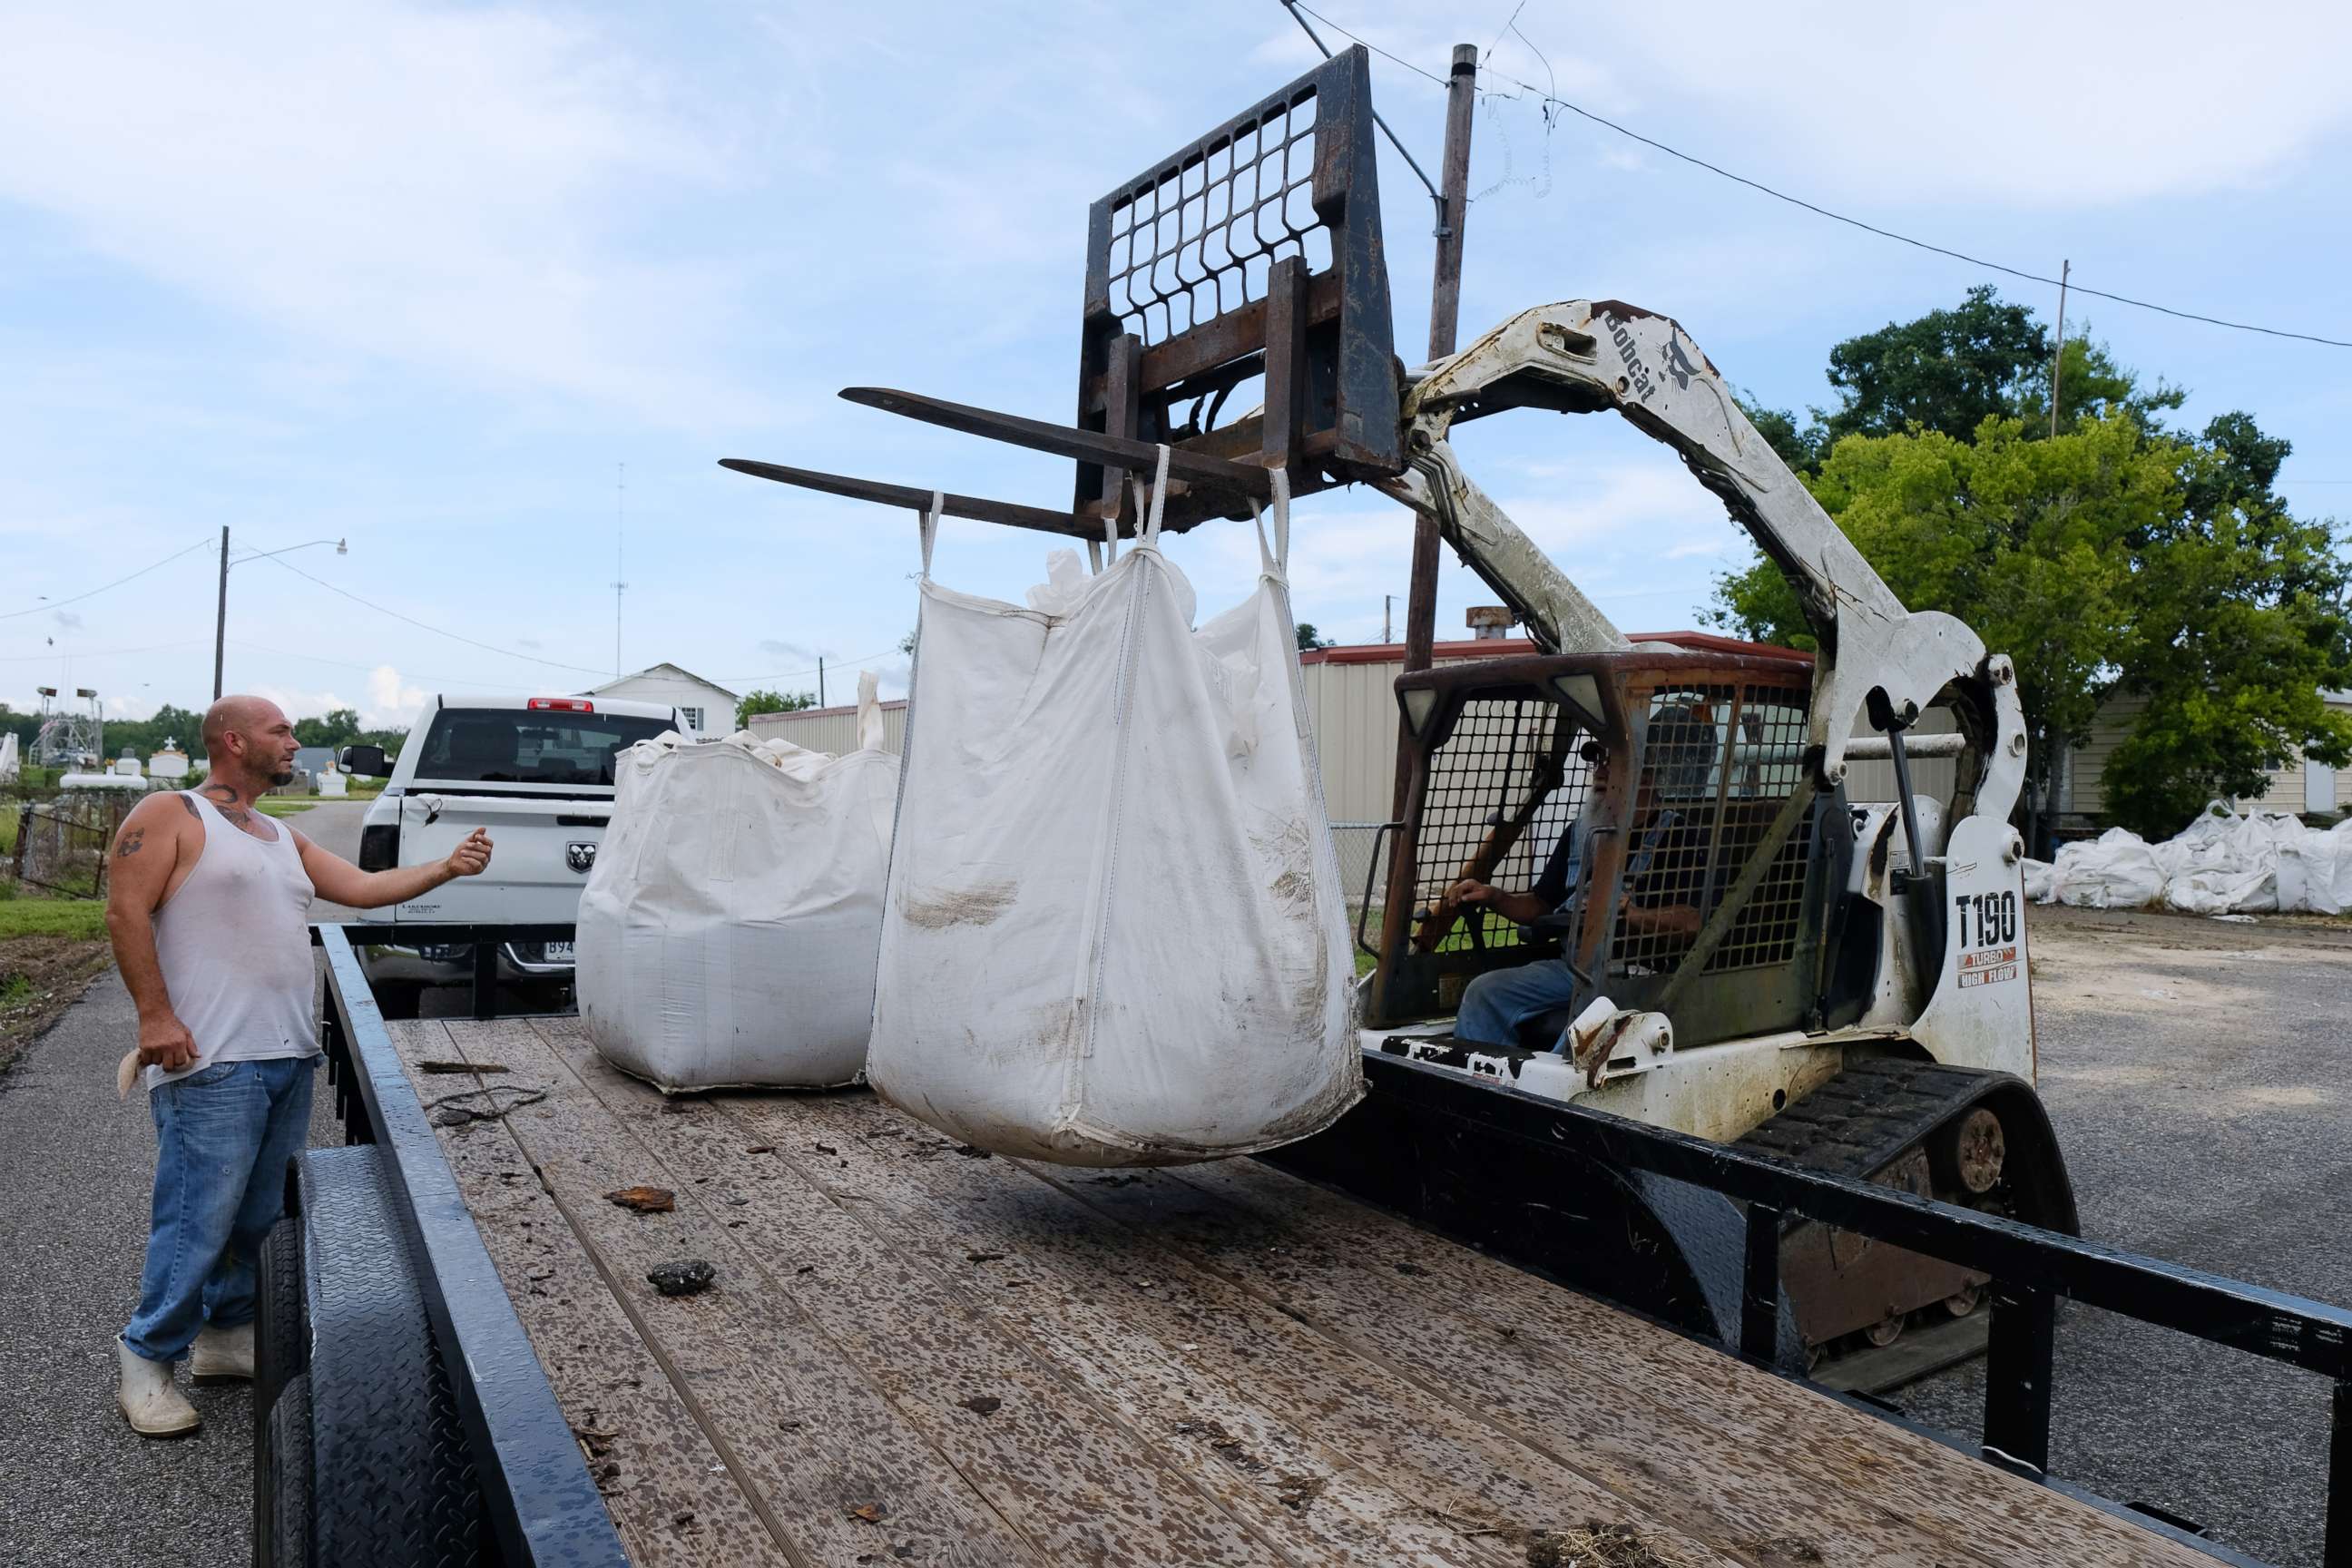 PHOTO: Kerry Warren works to get sand bags ready for flood prevention ahead of a tropical system in Lafitte, La., July 11, 2019.